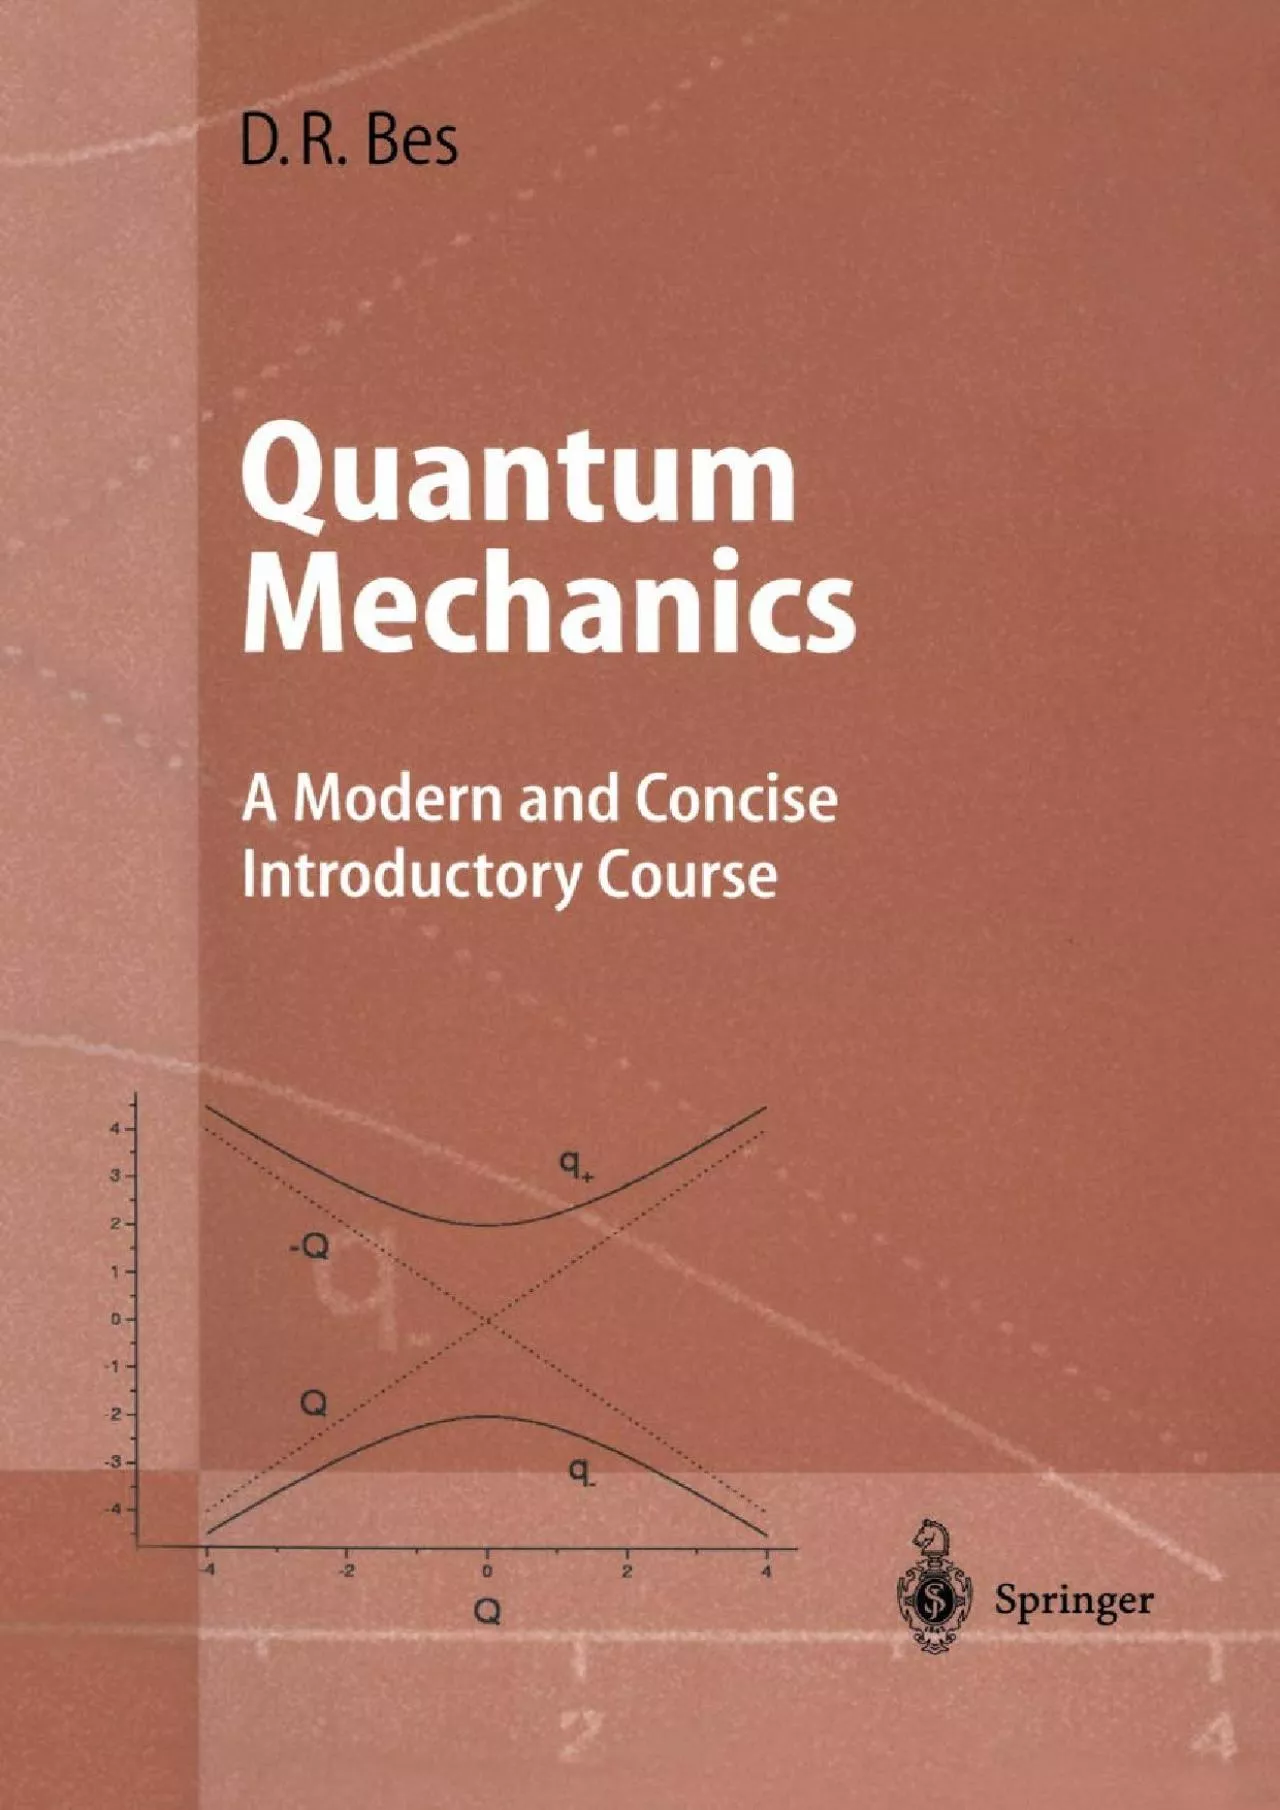 [eBOOK]-Quantum Mechanics: A Modern and Concise Introductory Course (Advanced Texts in